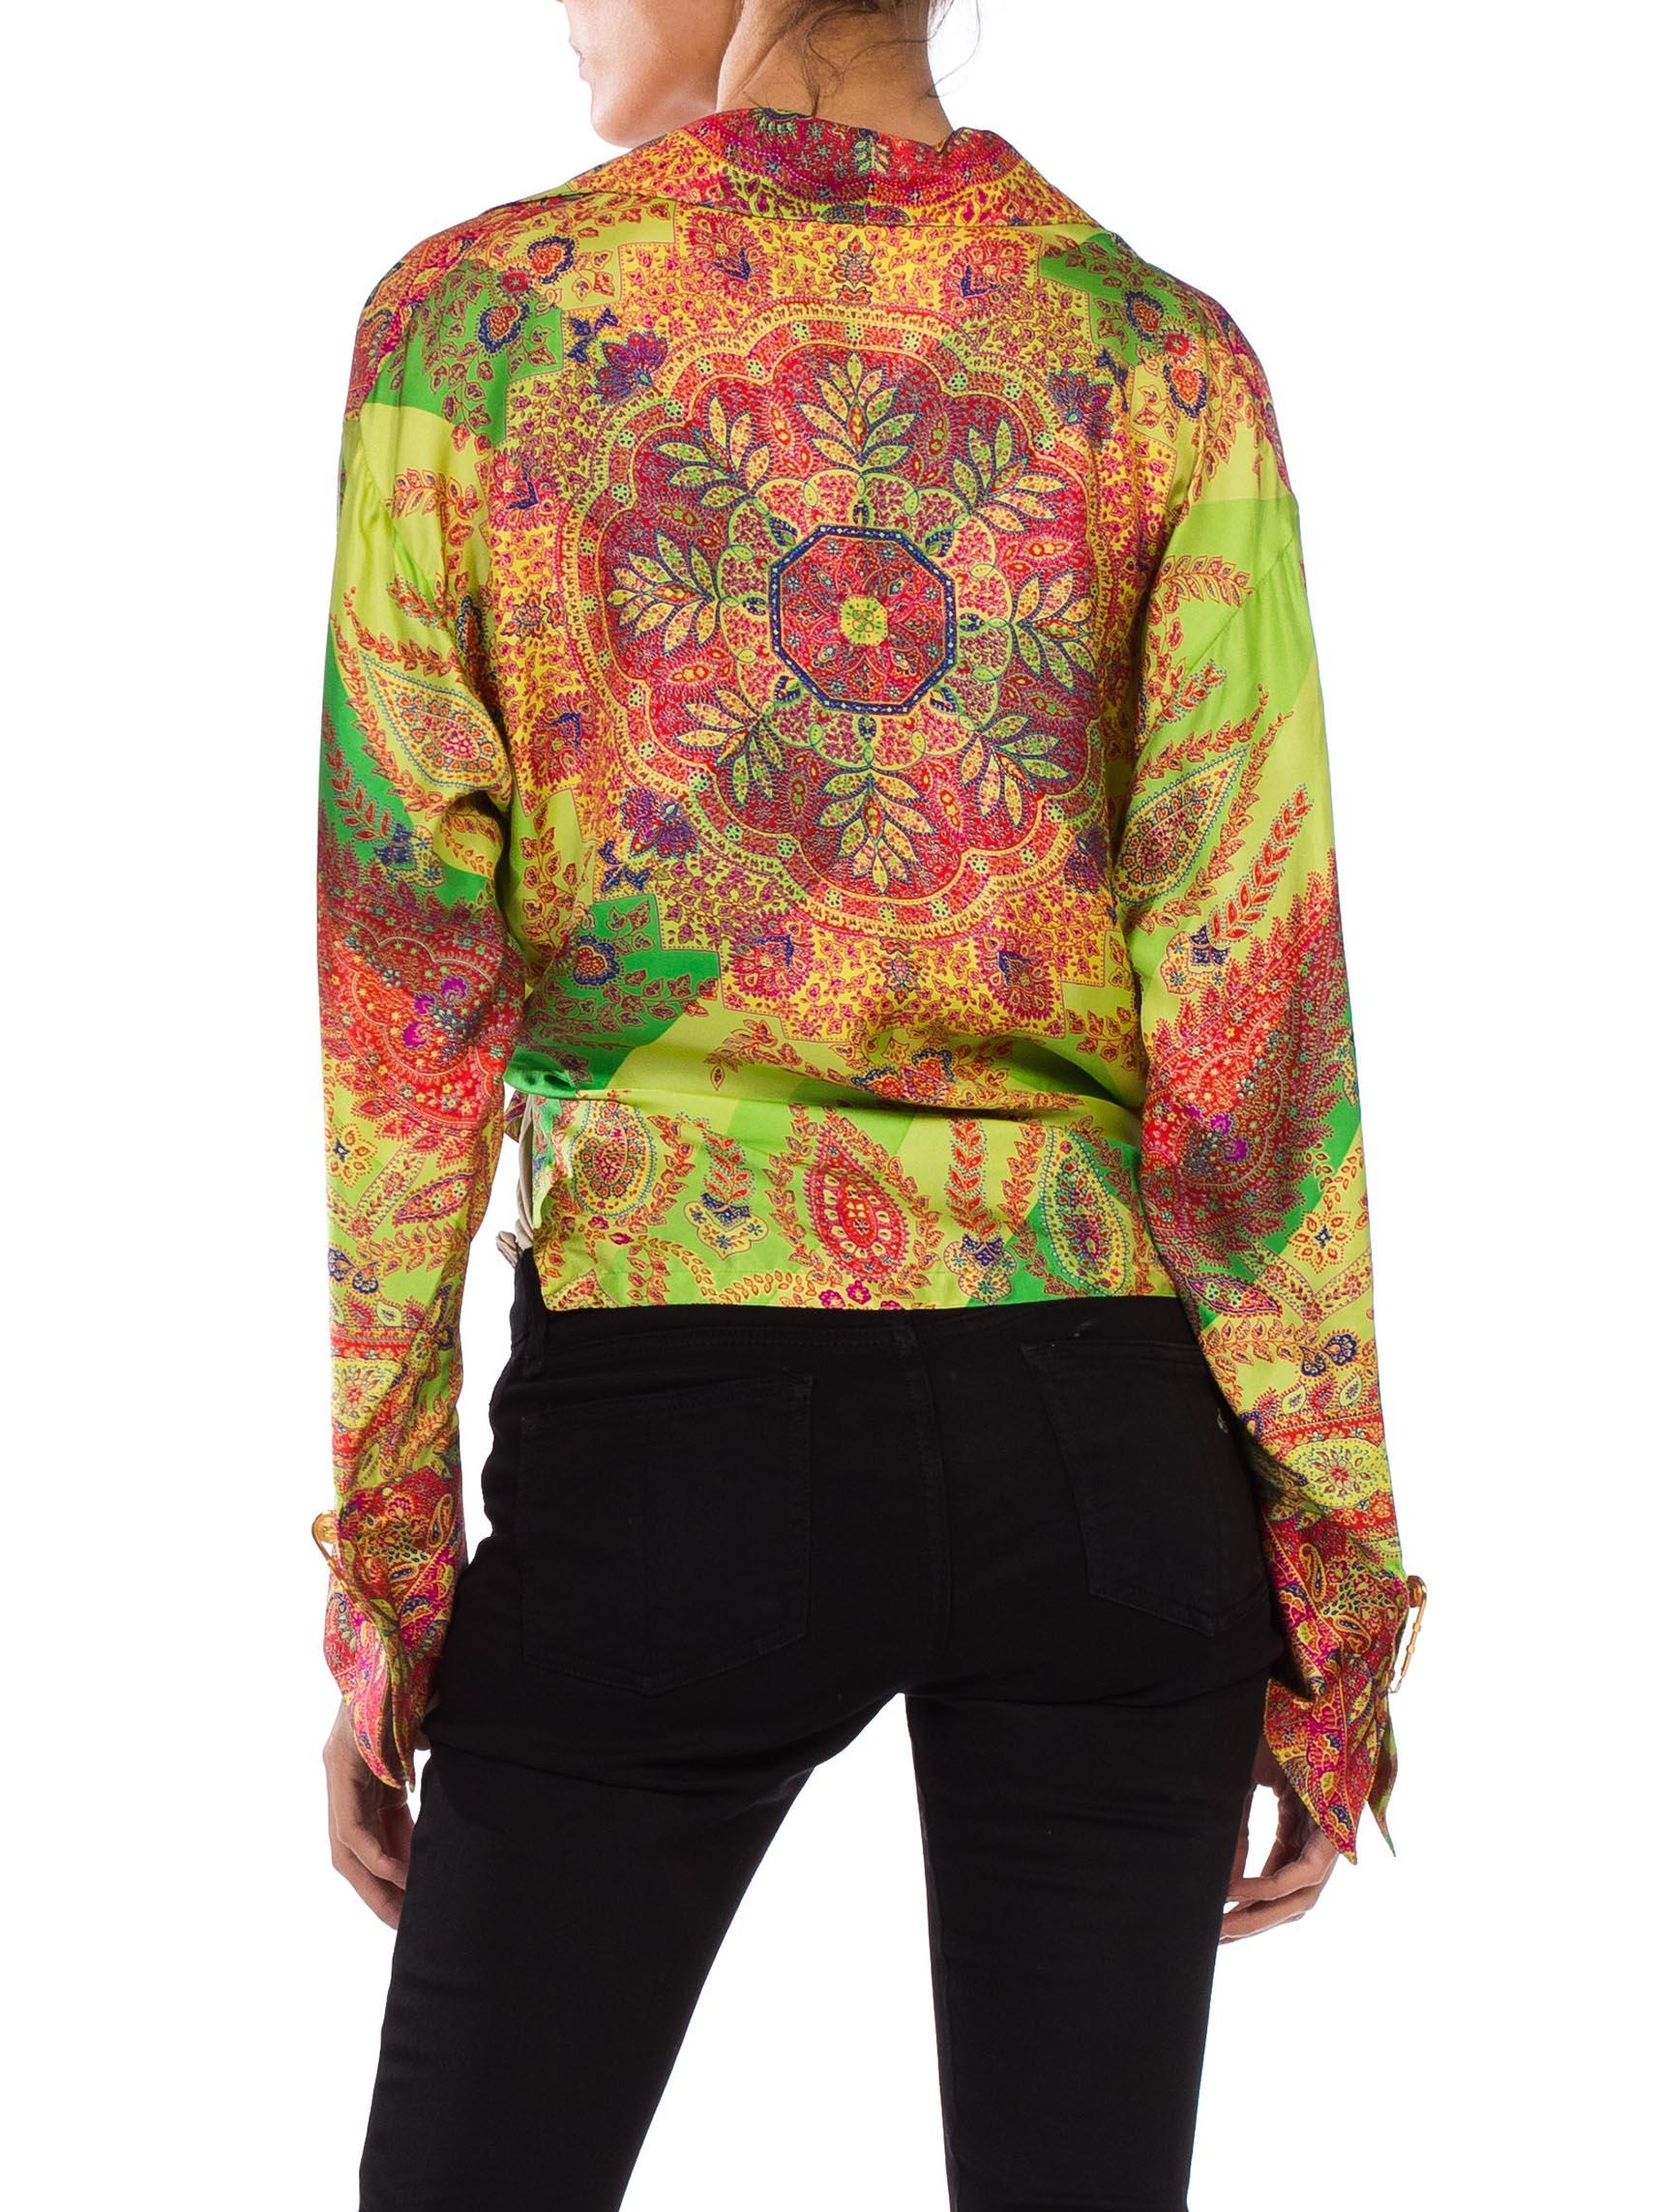 1990S GIANNI VERSACE Paisley Silk Twill Blouse From The Punk Medusa Safety Pin Collection